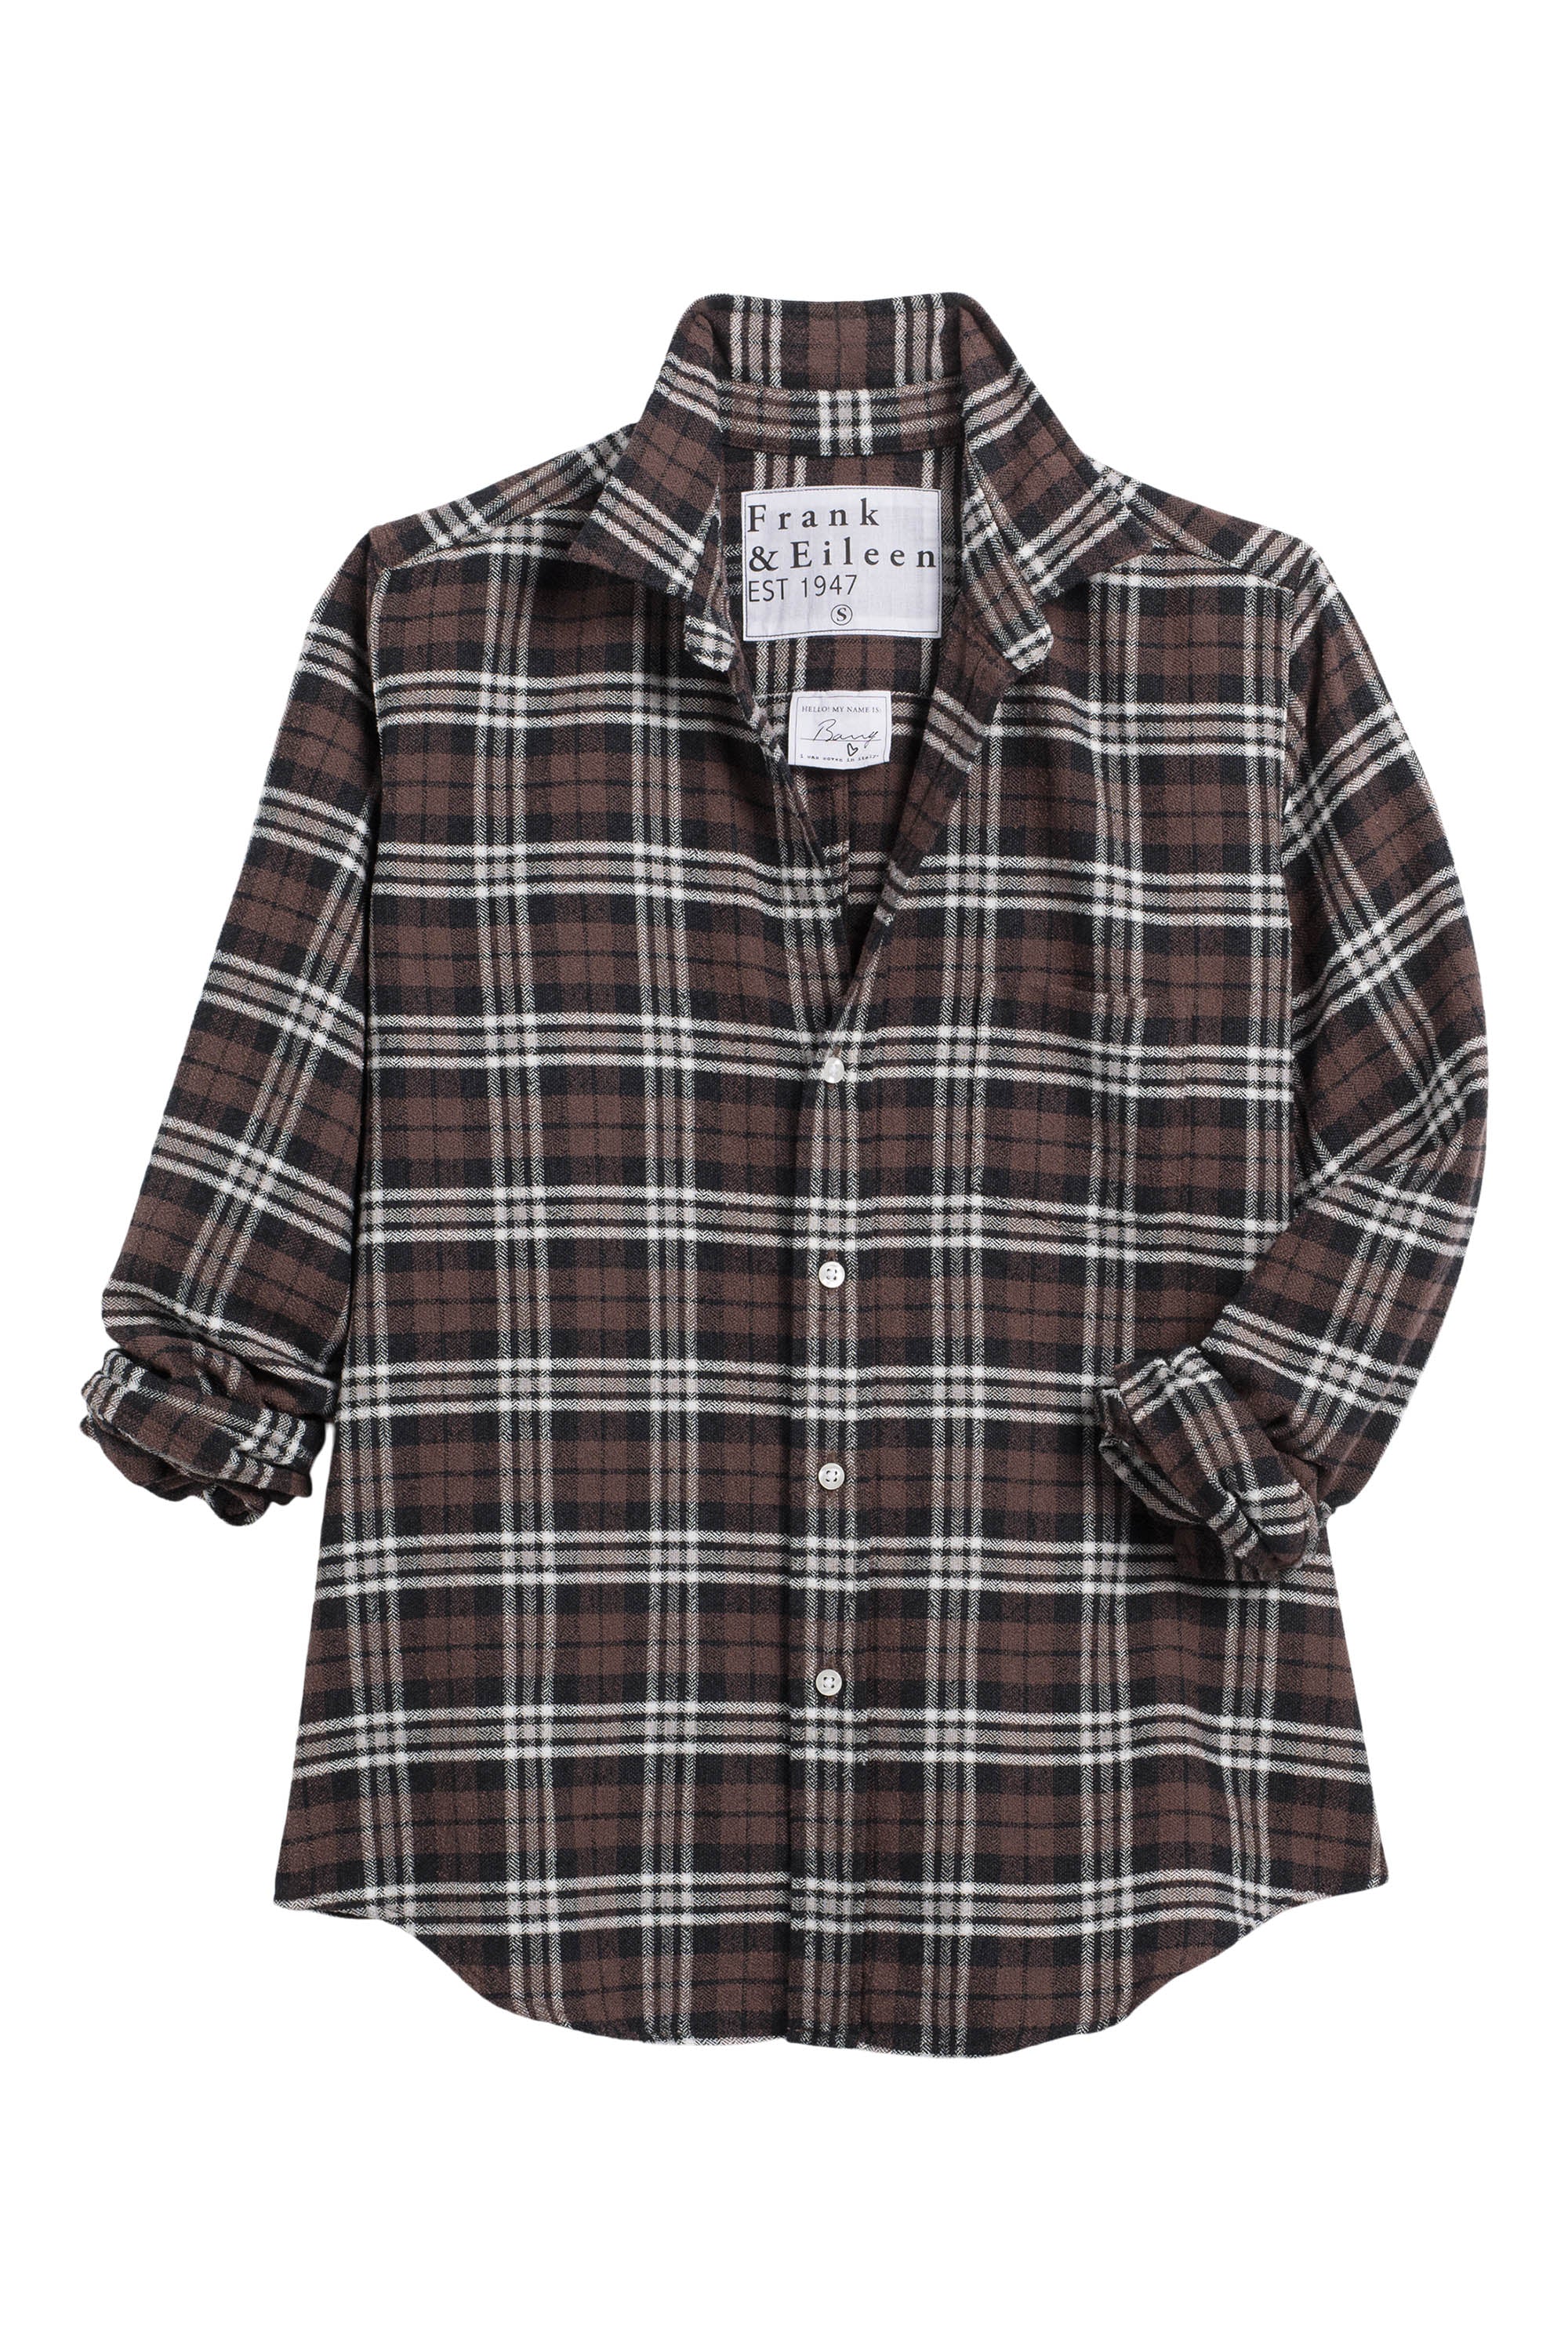 Frank & Eileen Barry Tailored Button Up Shirt in Black, Brown, White Plaid